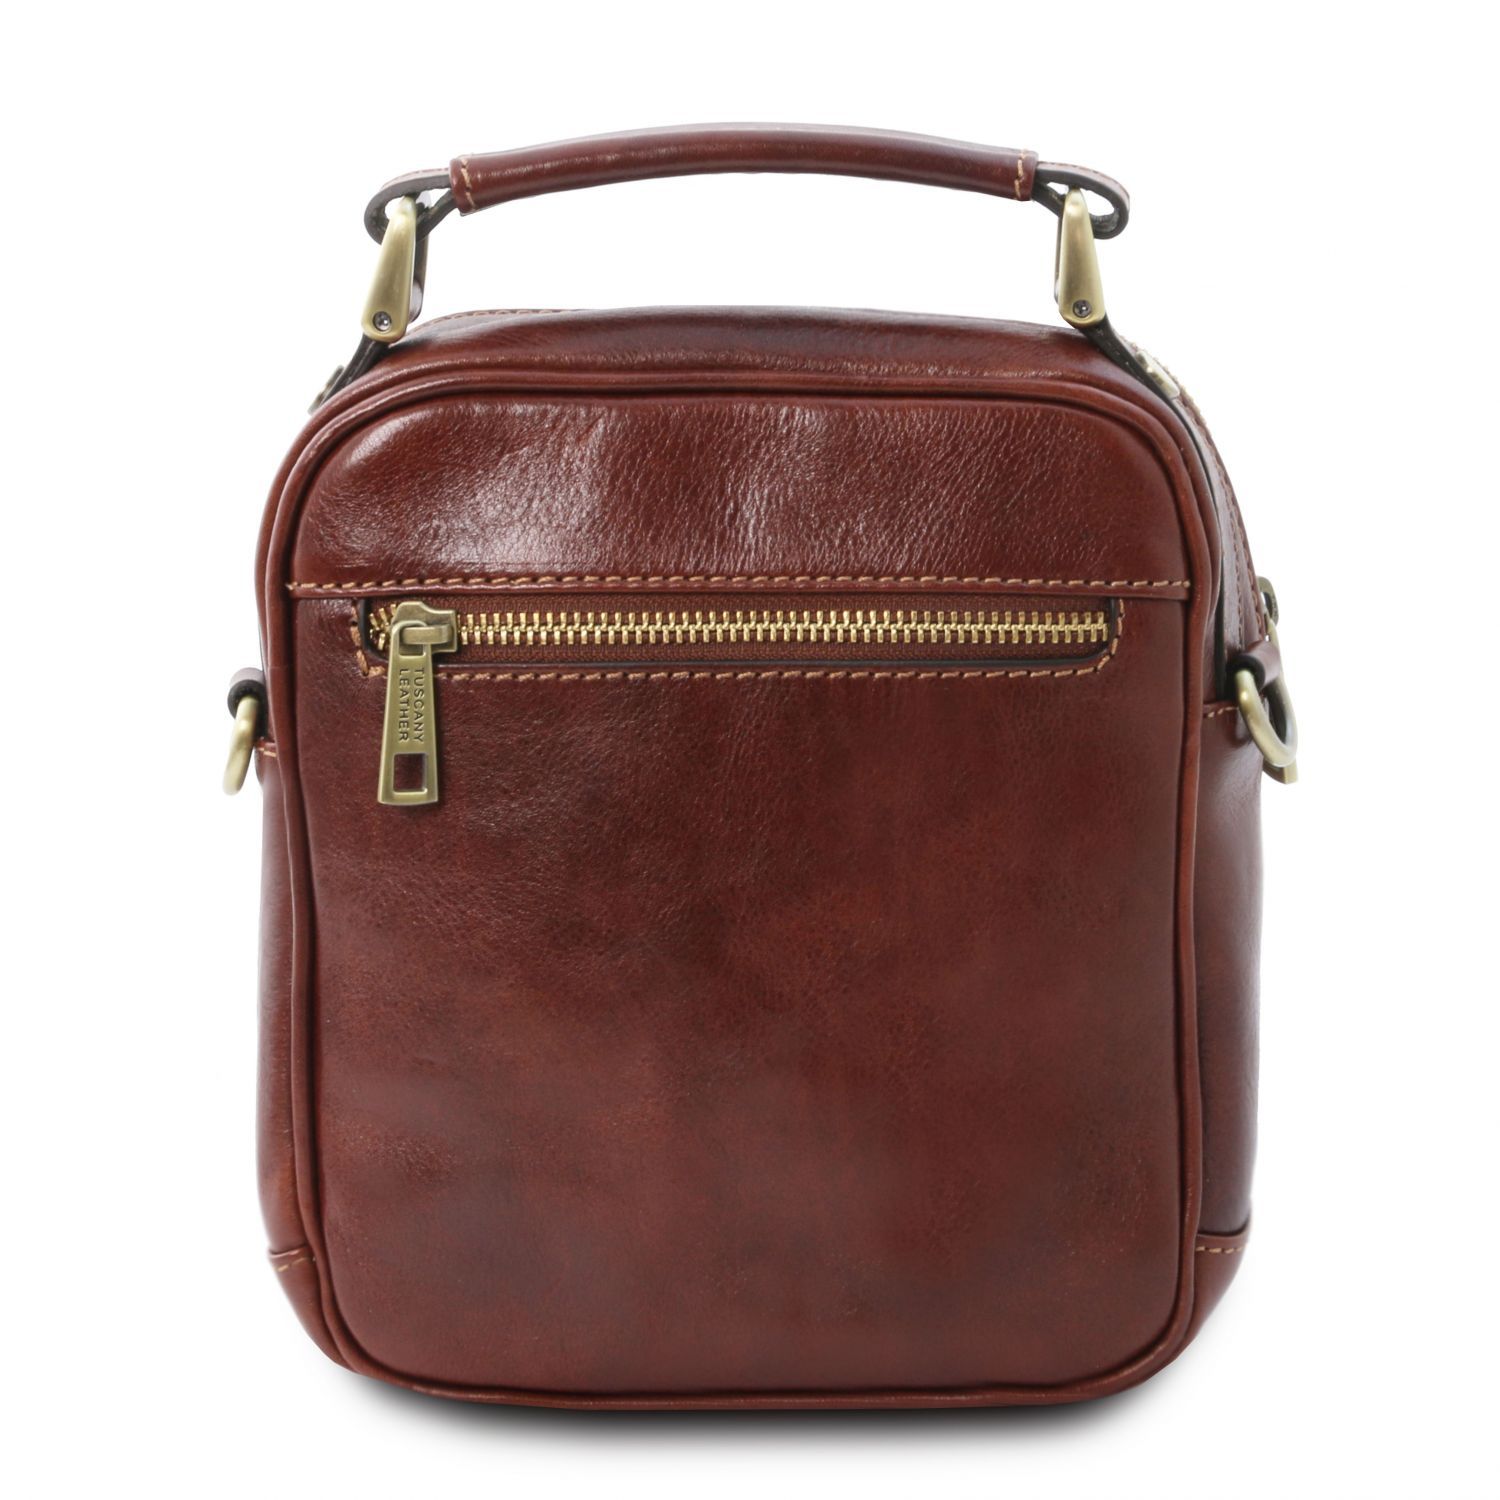 Leather Crossbody Bag with Handle - Paul - Domini Leather